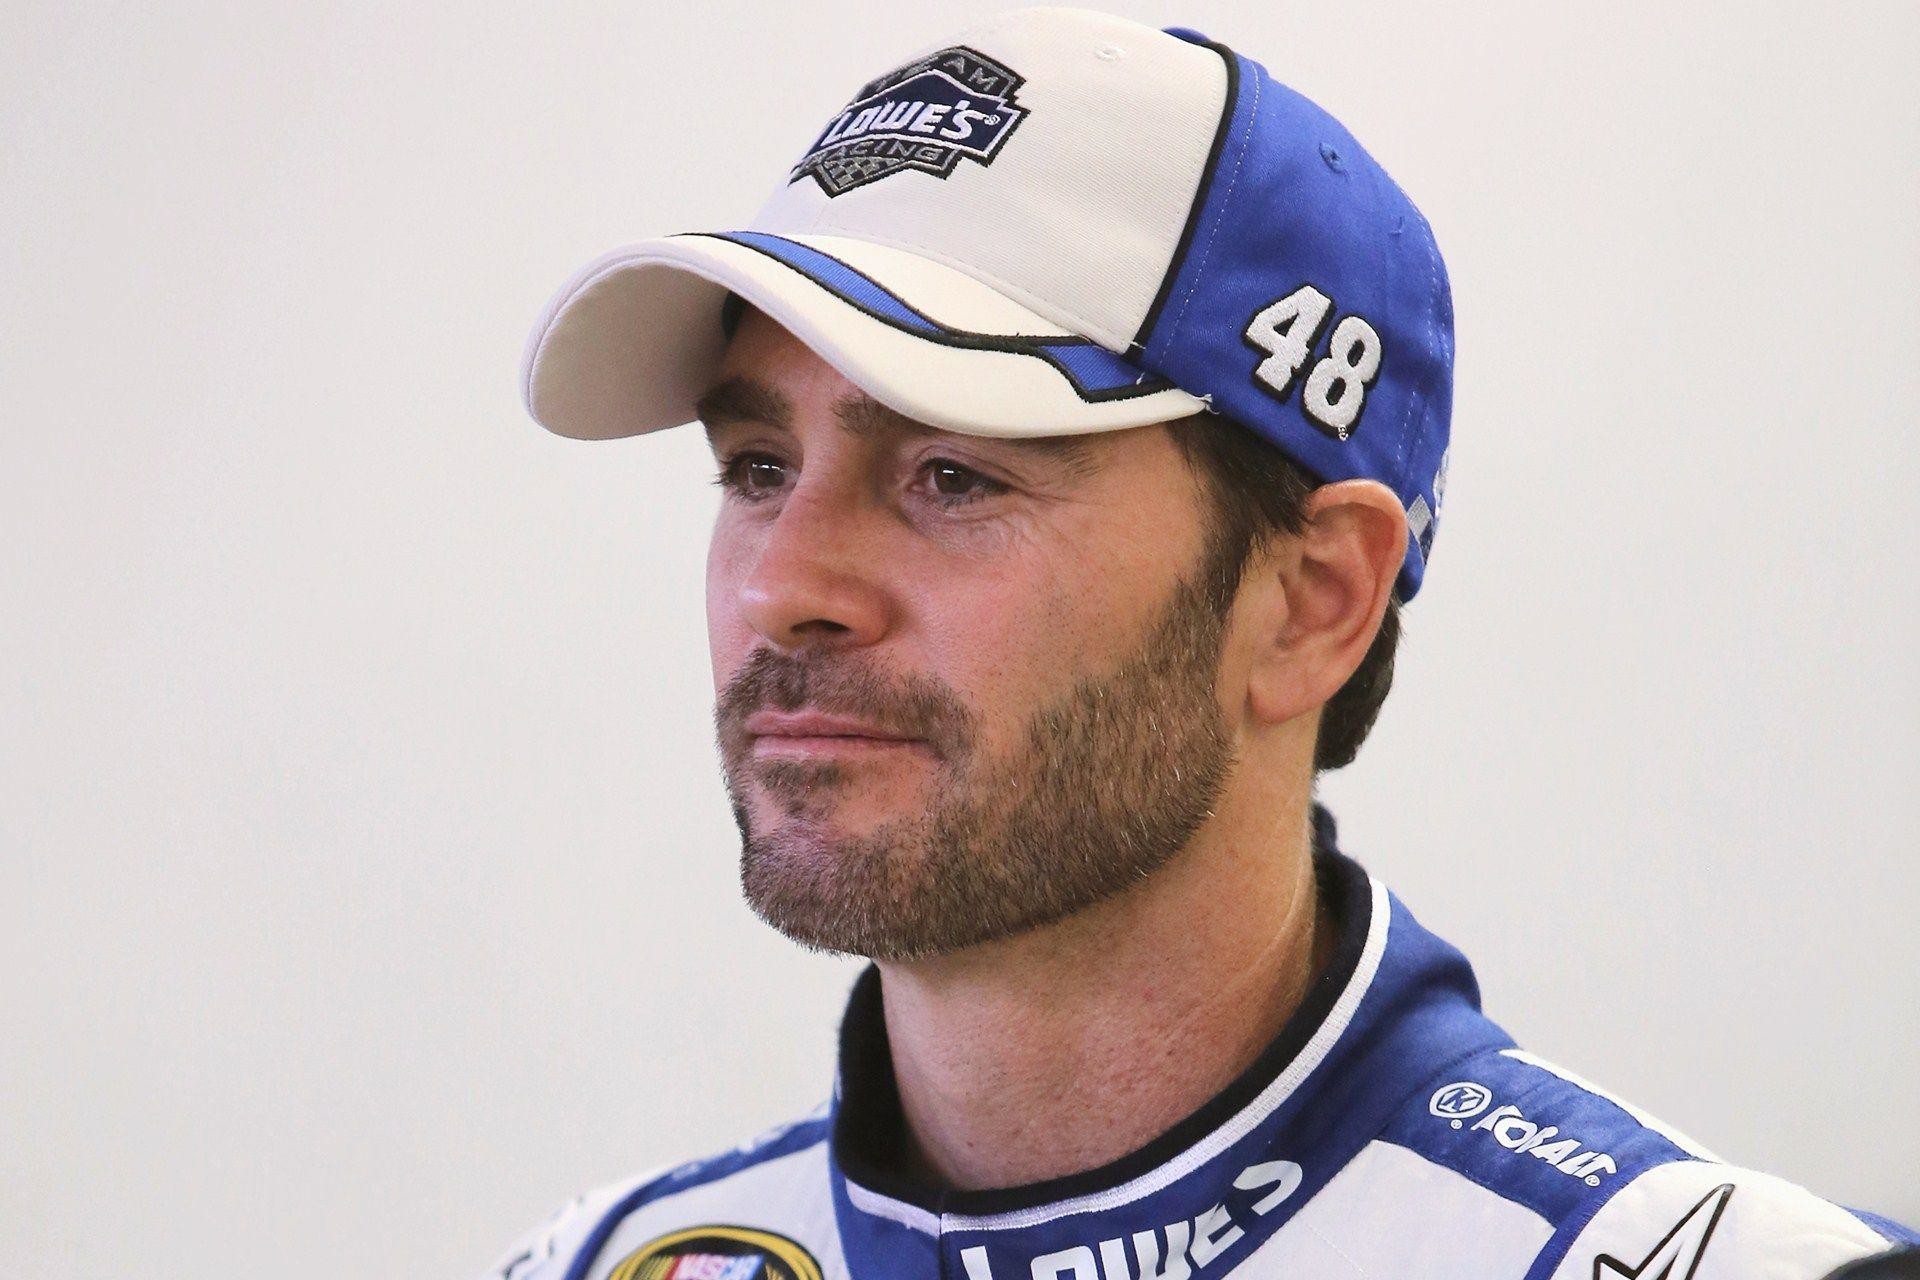 1920x1280 Jimmie Johnson Car Racing Driver Wallpaper - High Quality Wallpapers